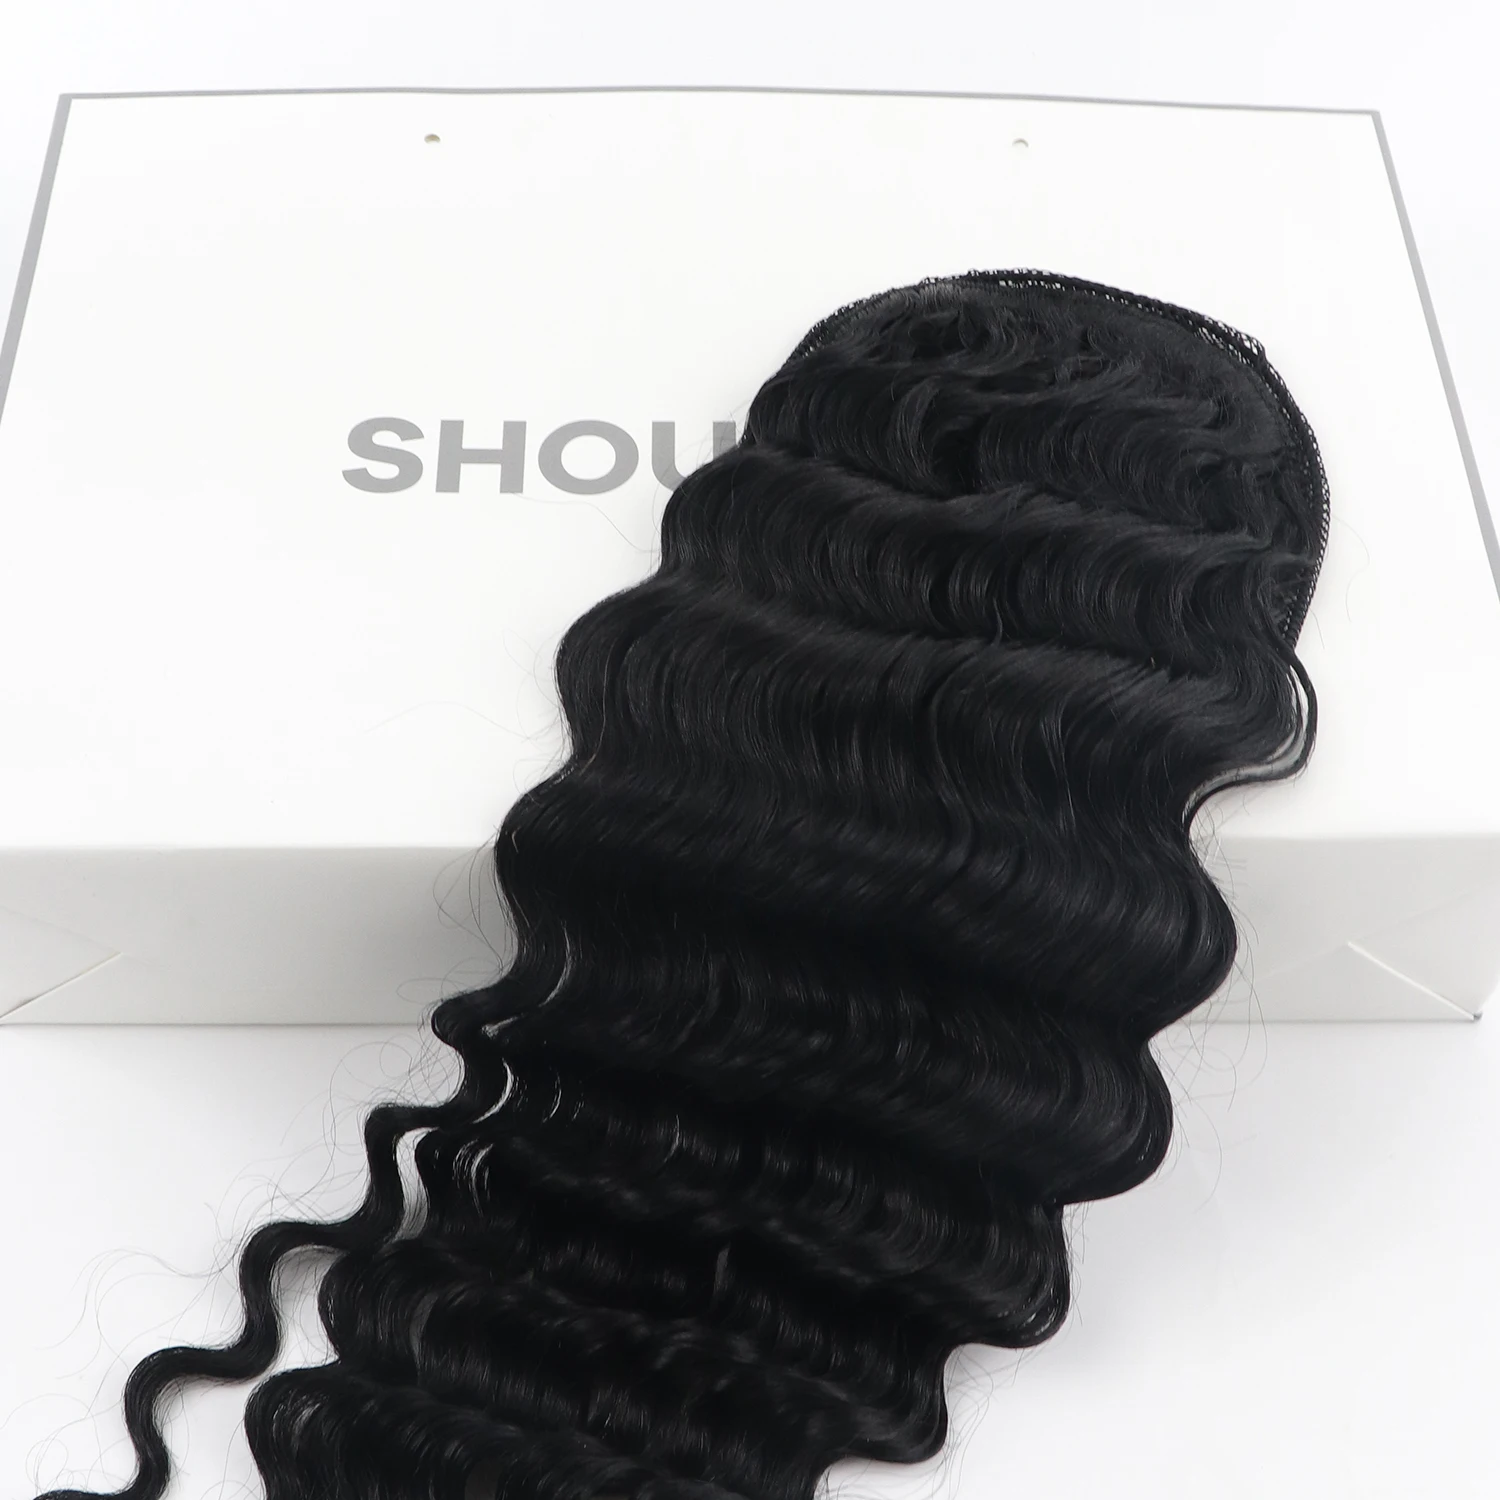 

Factory Price 100g Loose Wave Ponytails 16 Inch 100% Human hair Ponytail Drawstring Hair Extensions